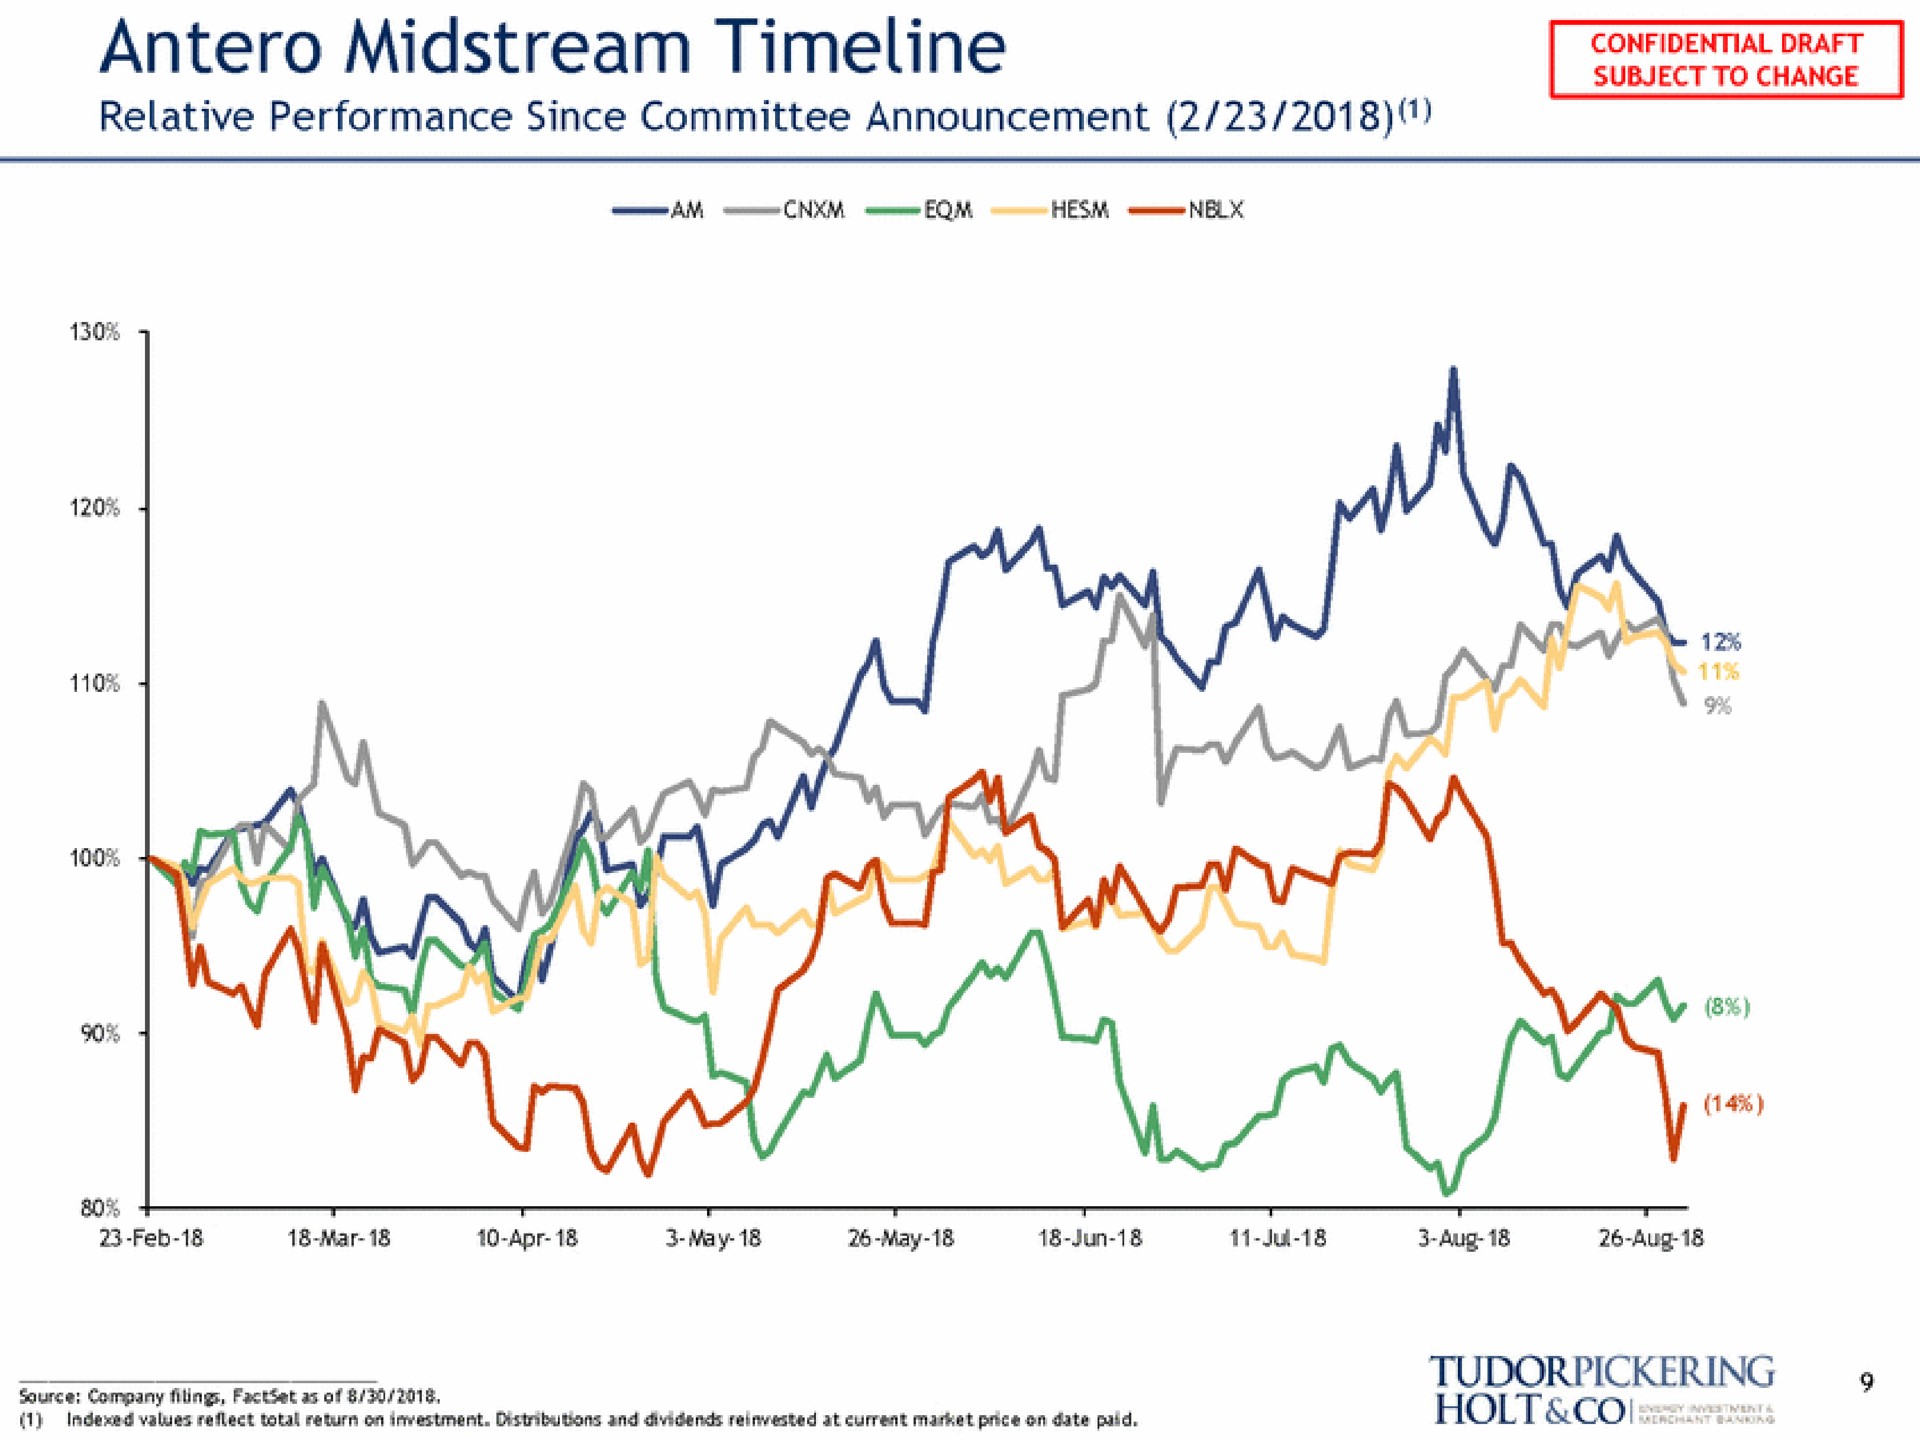 midstream relative performance since committee announcement | Tudor, Pickering, Holt & Co